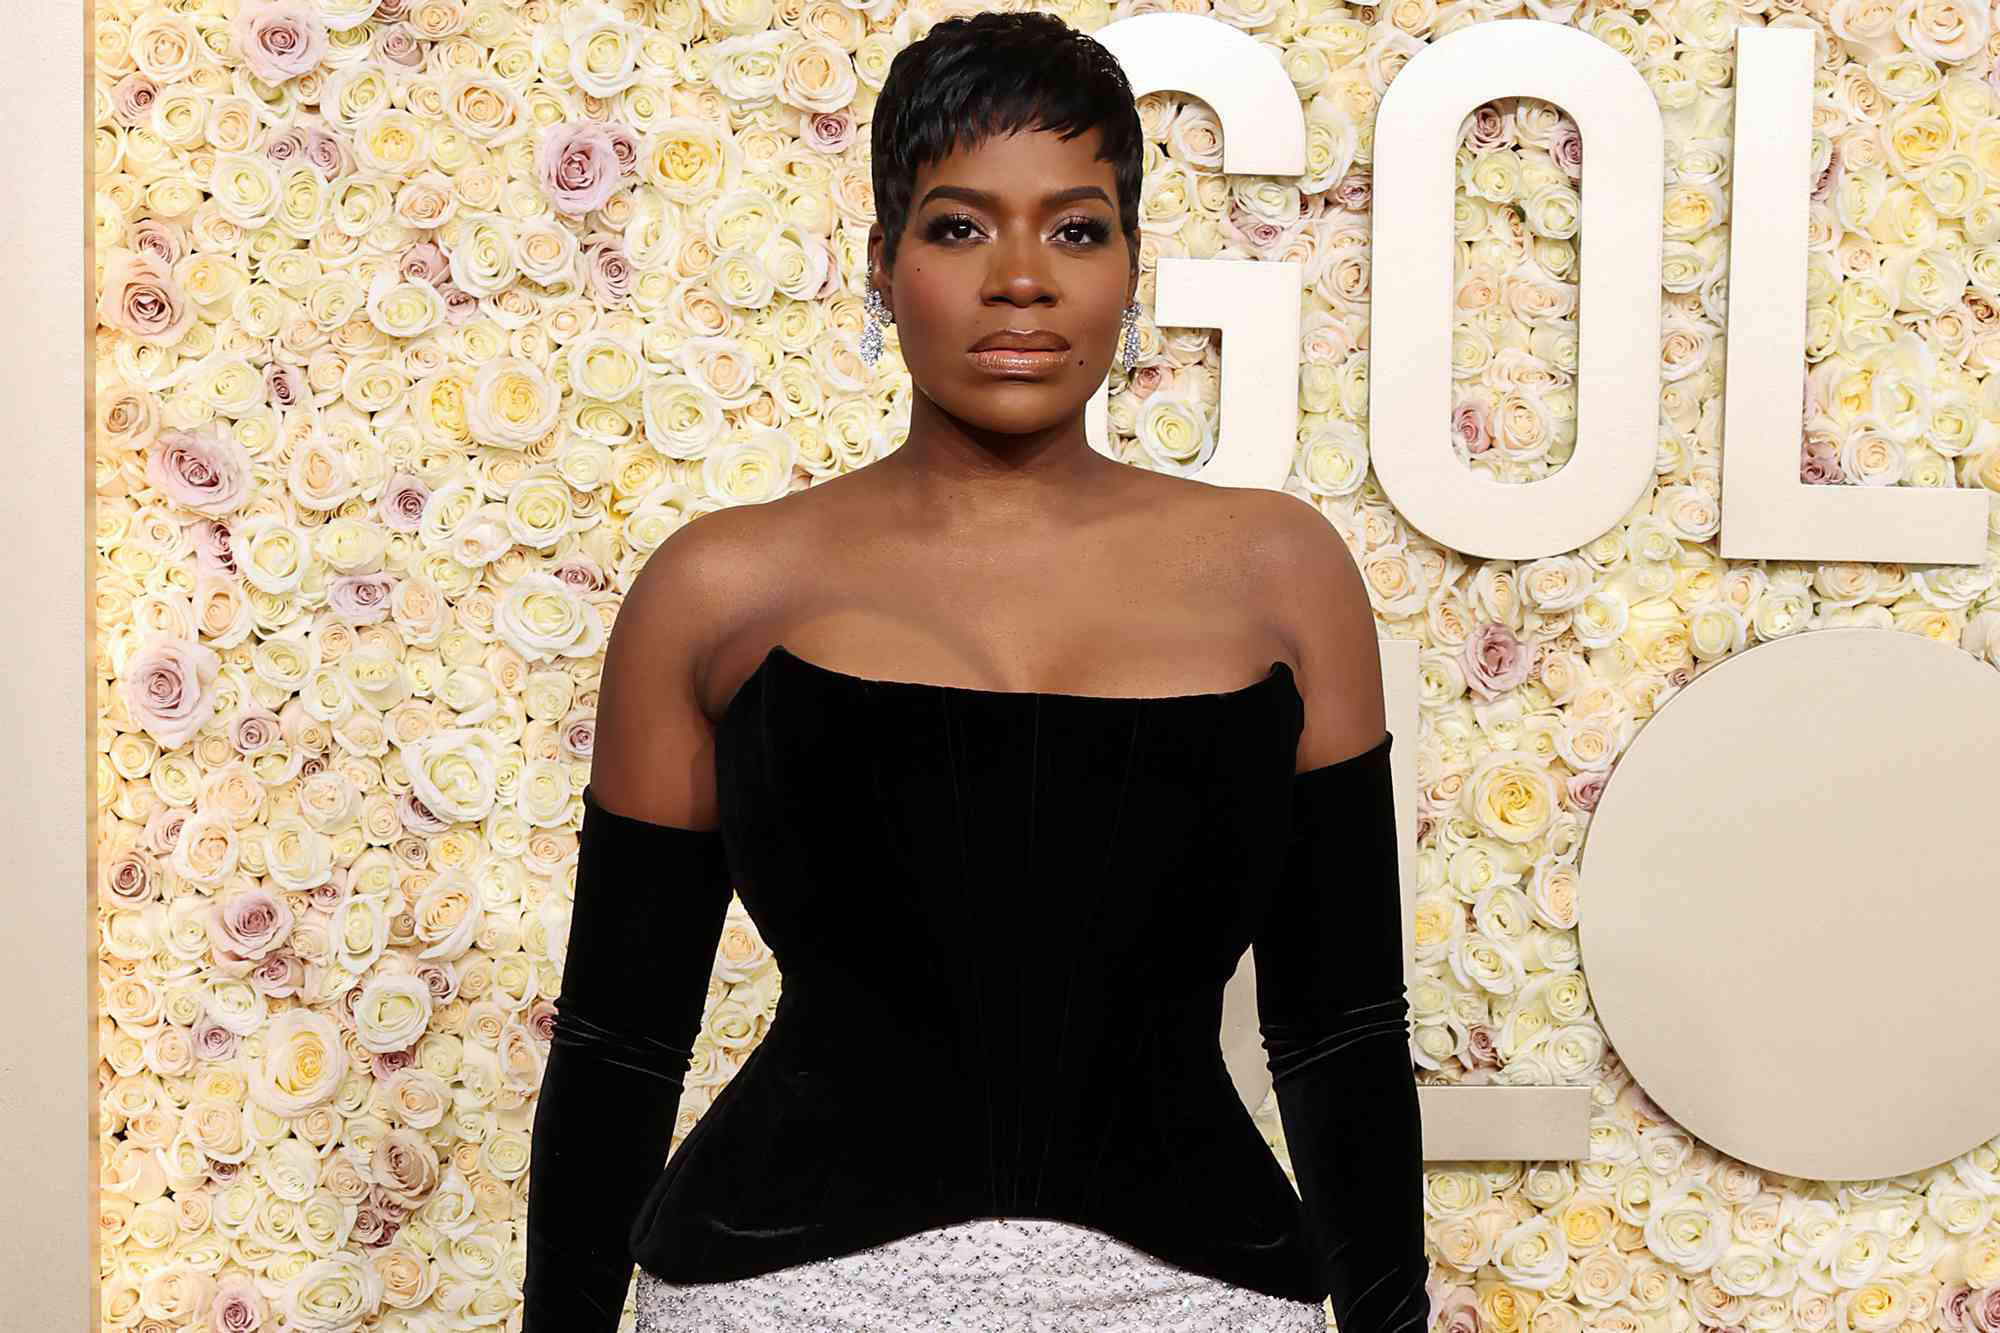 Fantasia Barrino Wears Lilac Skirt in a Nod to “The Color Purple” for